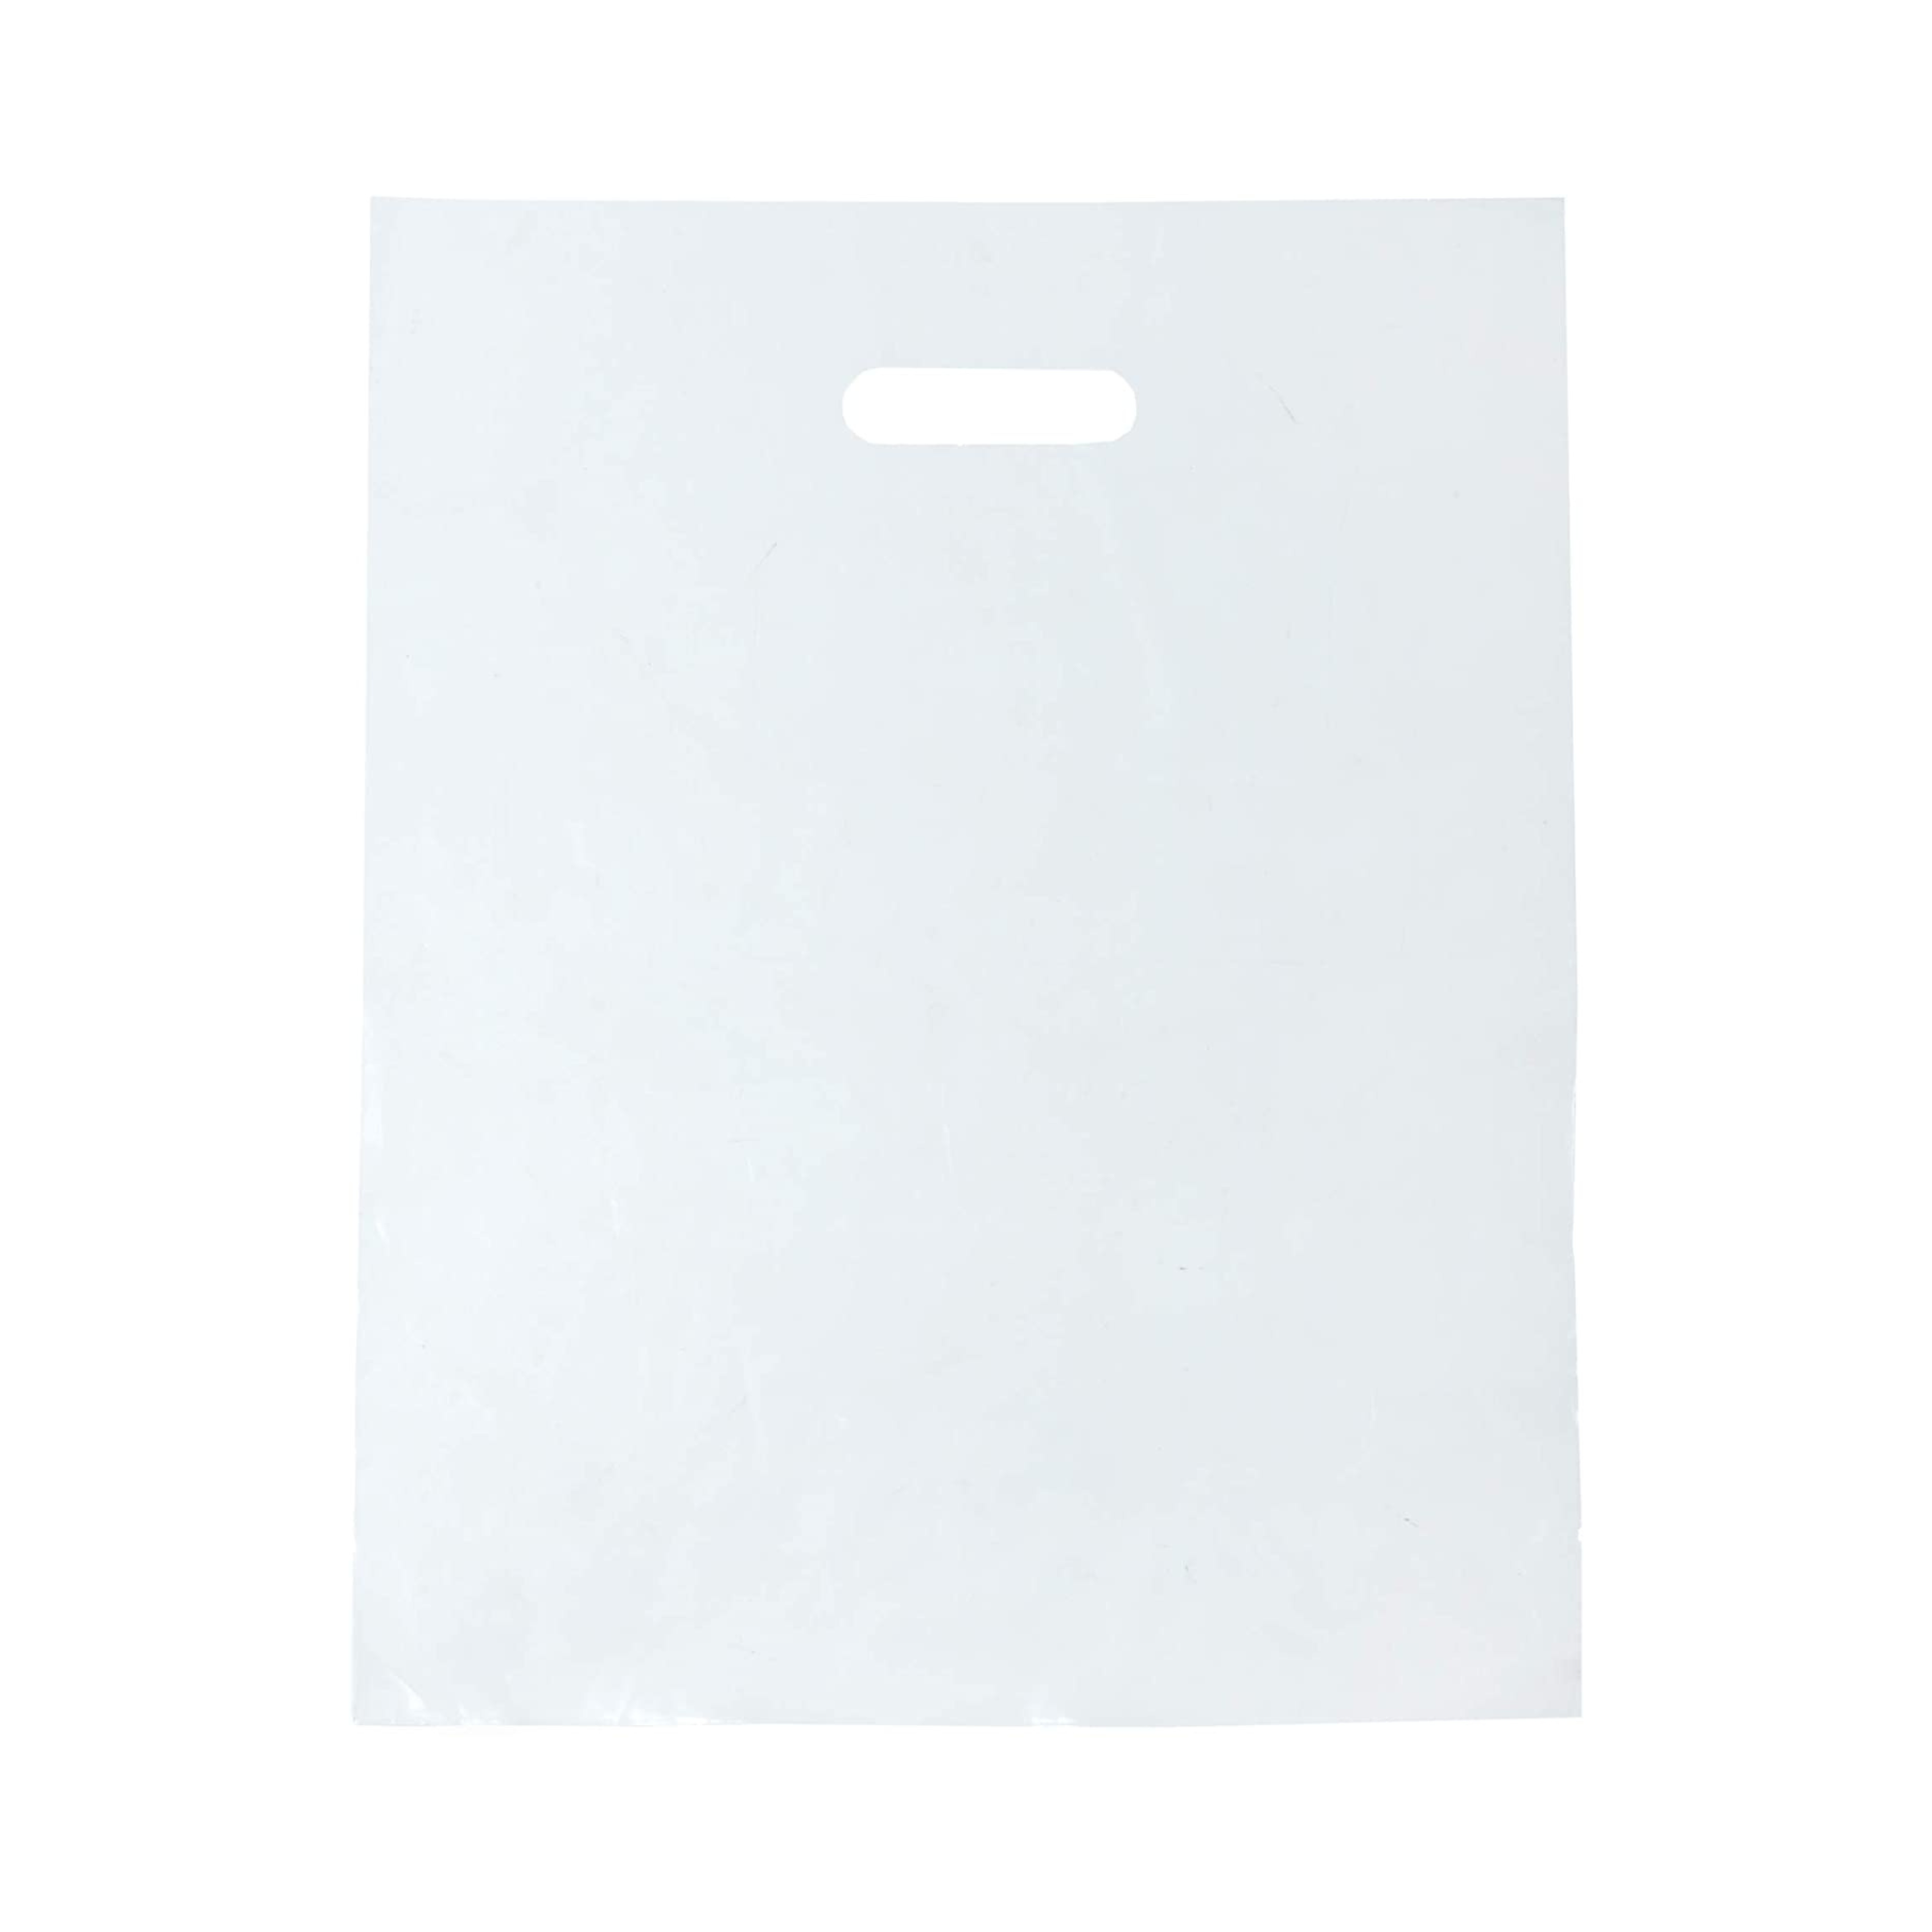 12x15 - 1.25 Mil Clear Merchandise Poly Bags for Clothing, Shopping, Tradeshow, Retails Pack of 100 - LDPE Clear Handle Bag - Infinite Pack